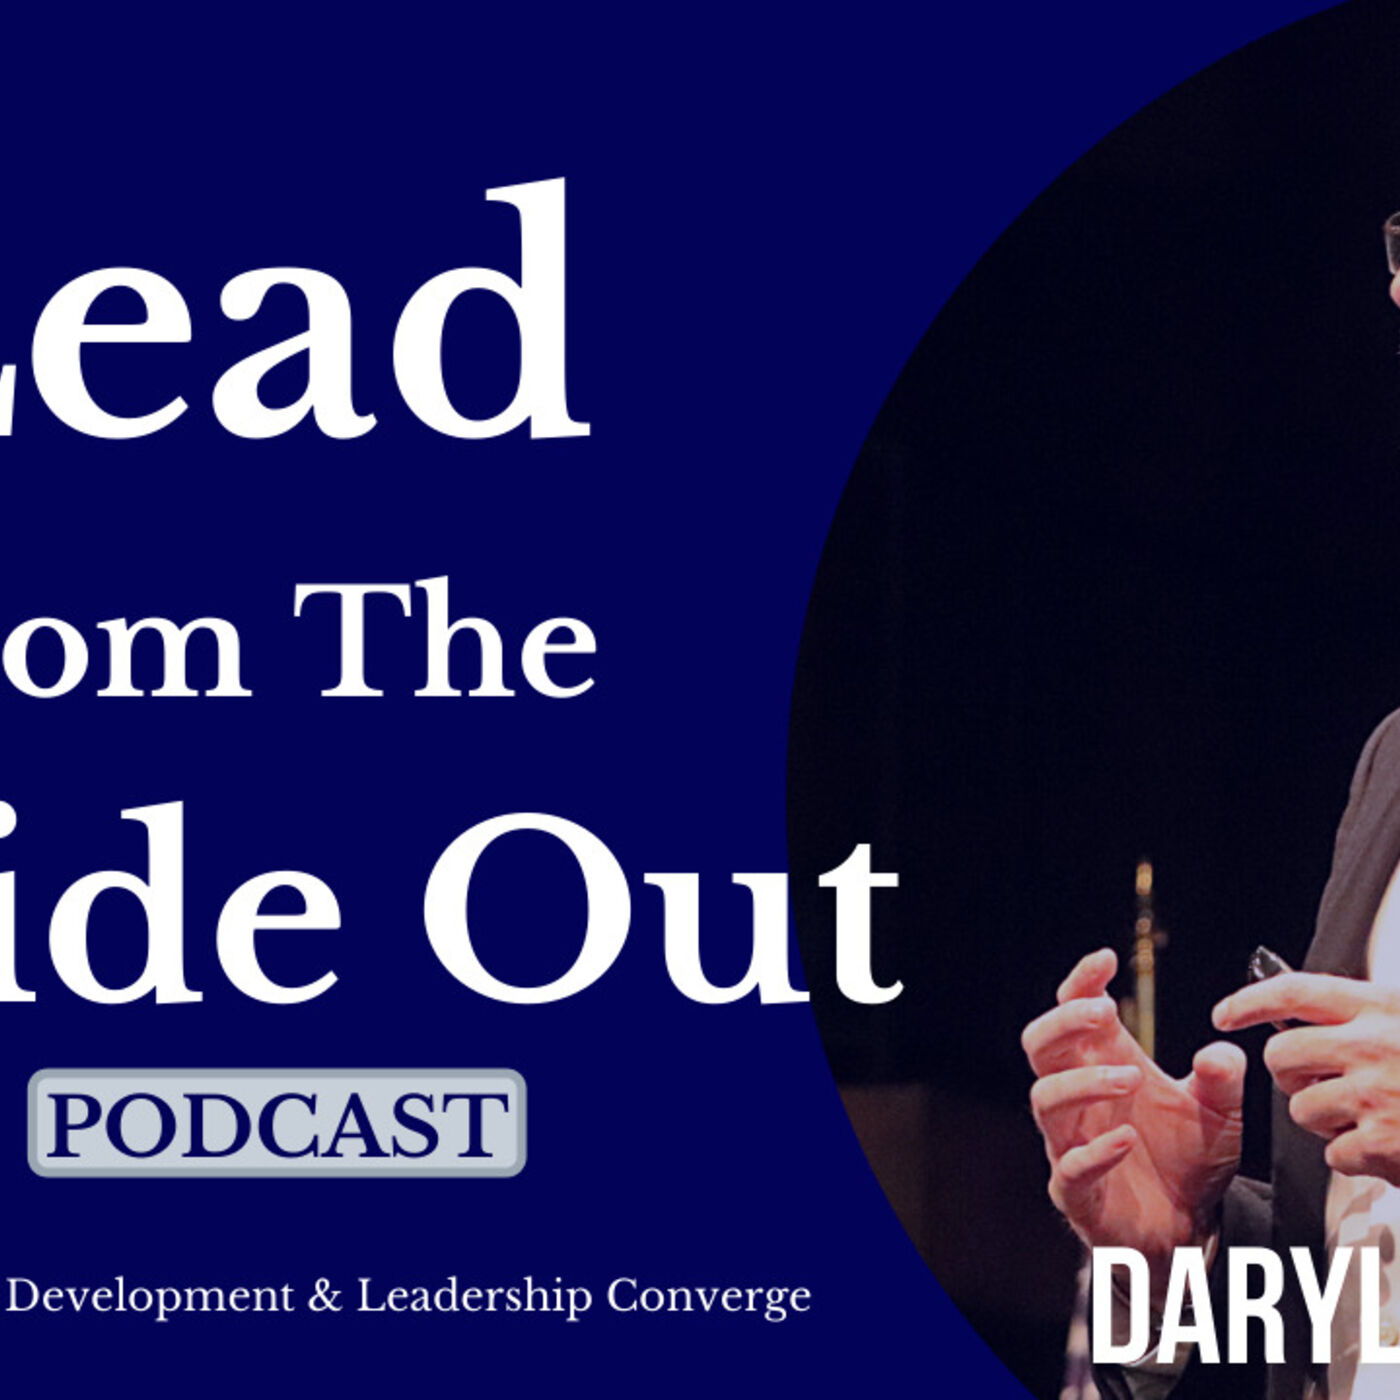 EP 17 - #1 Source of Influence a Leader Needs to Lead Effectively